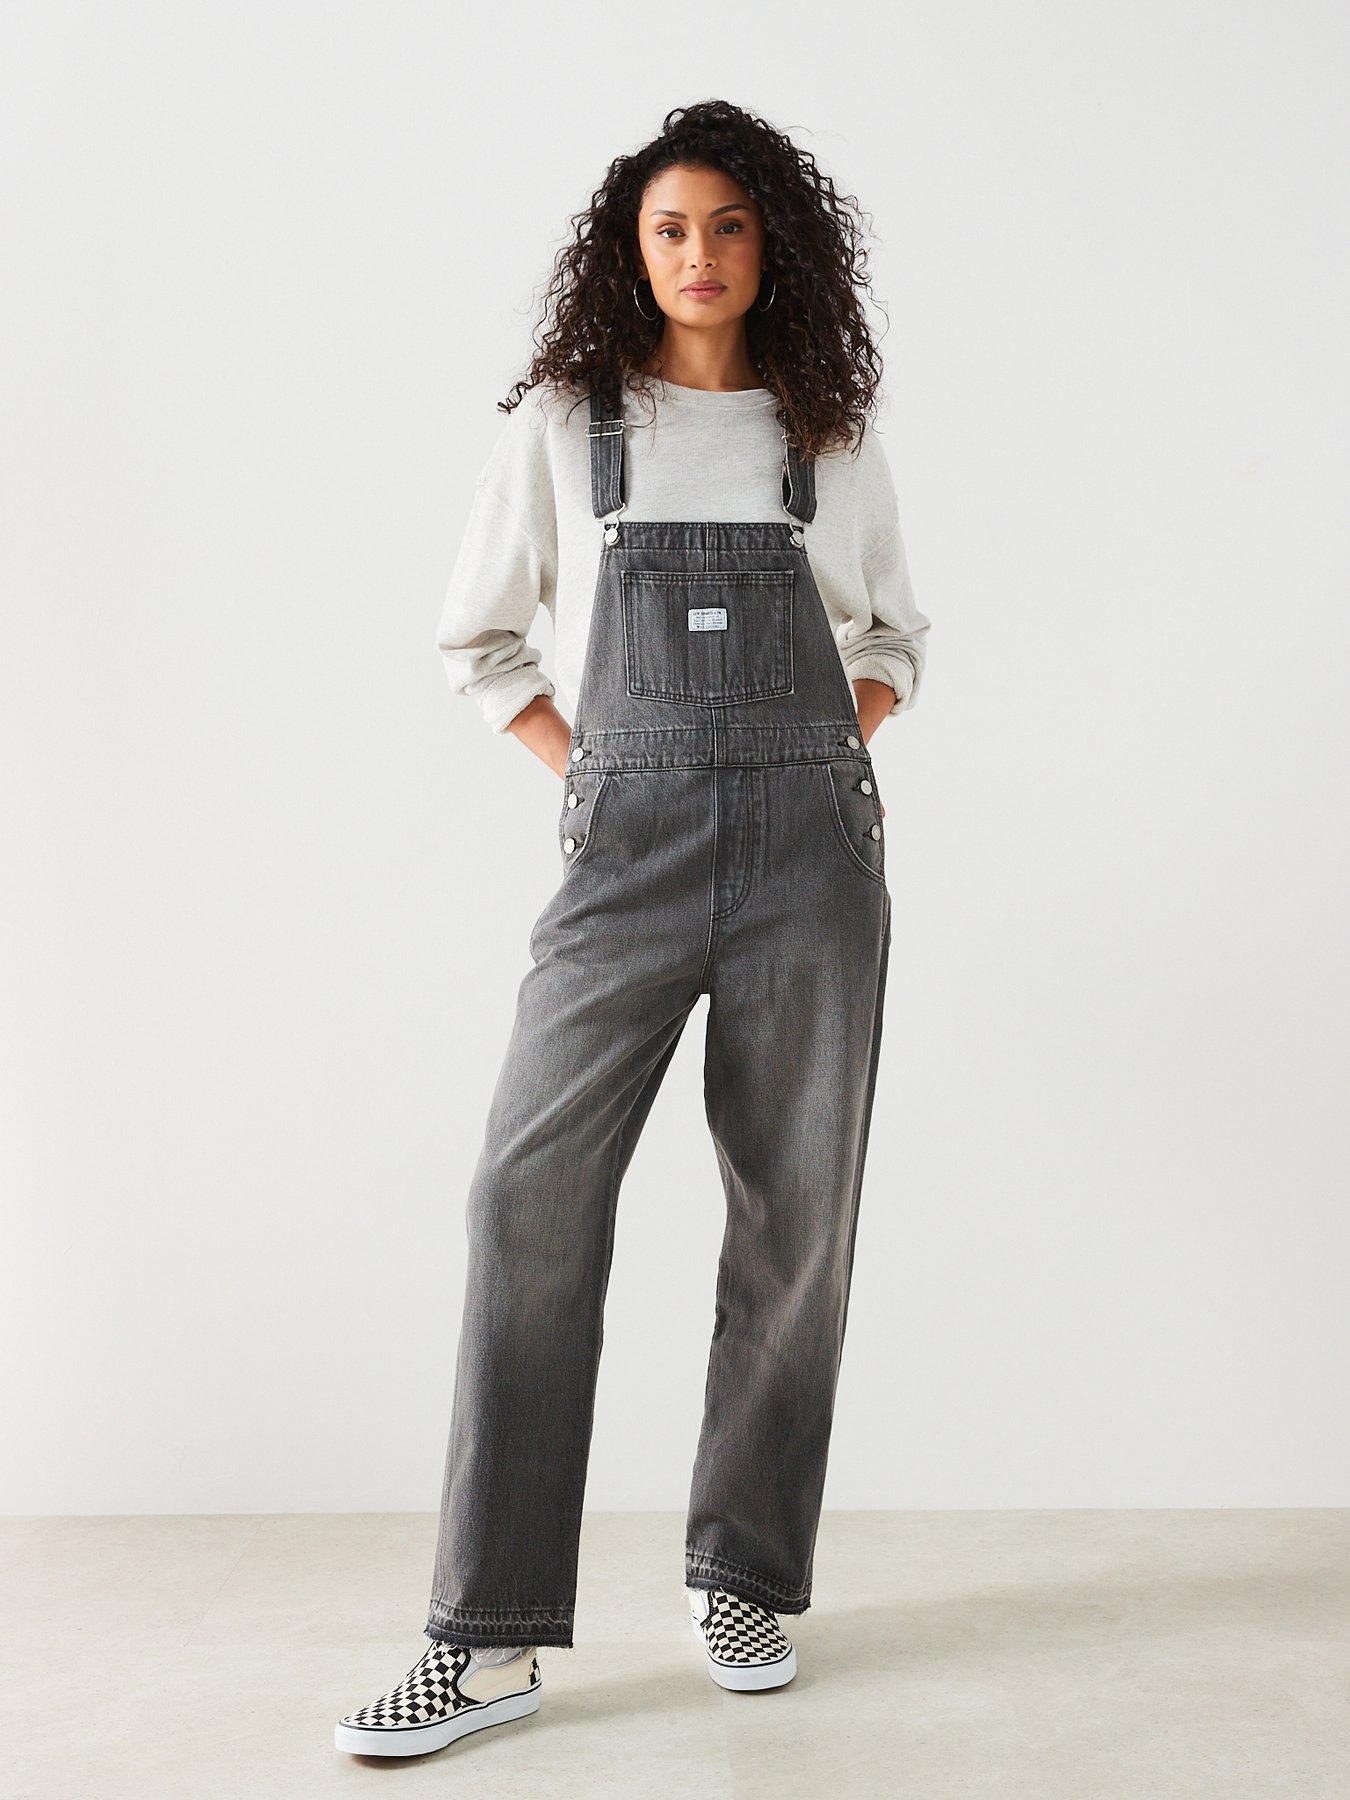 Buy White Stuff Daphne Jersey Dungarees from the Next UK online shop